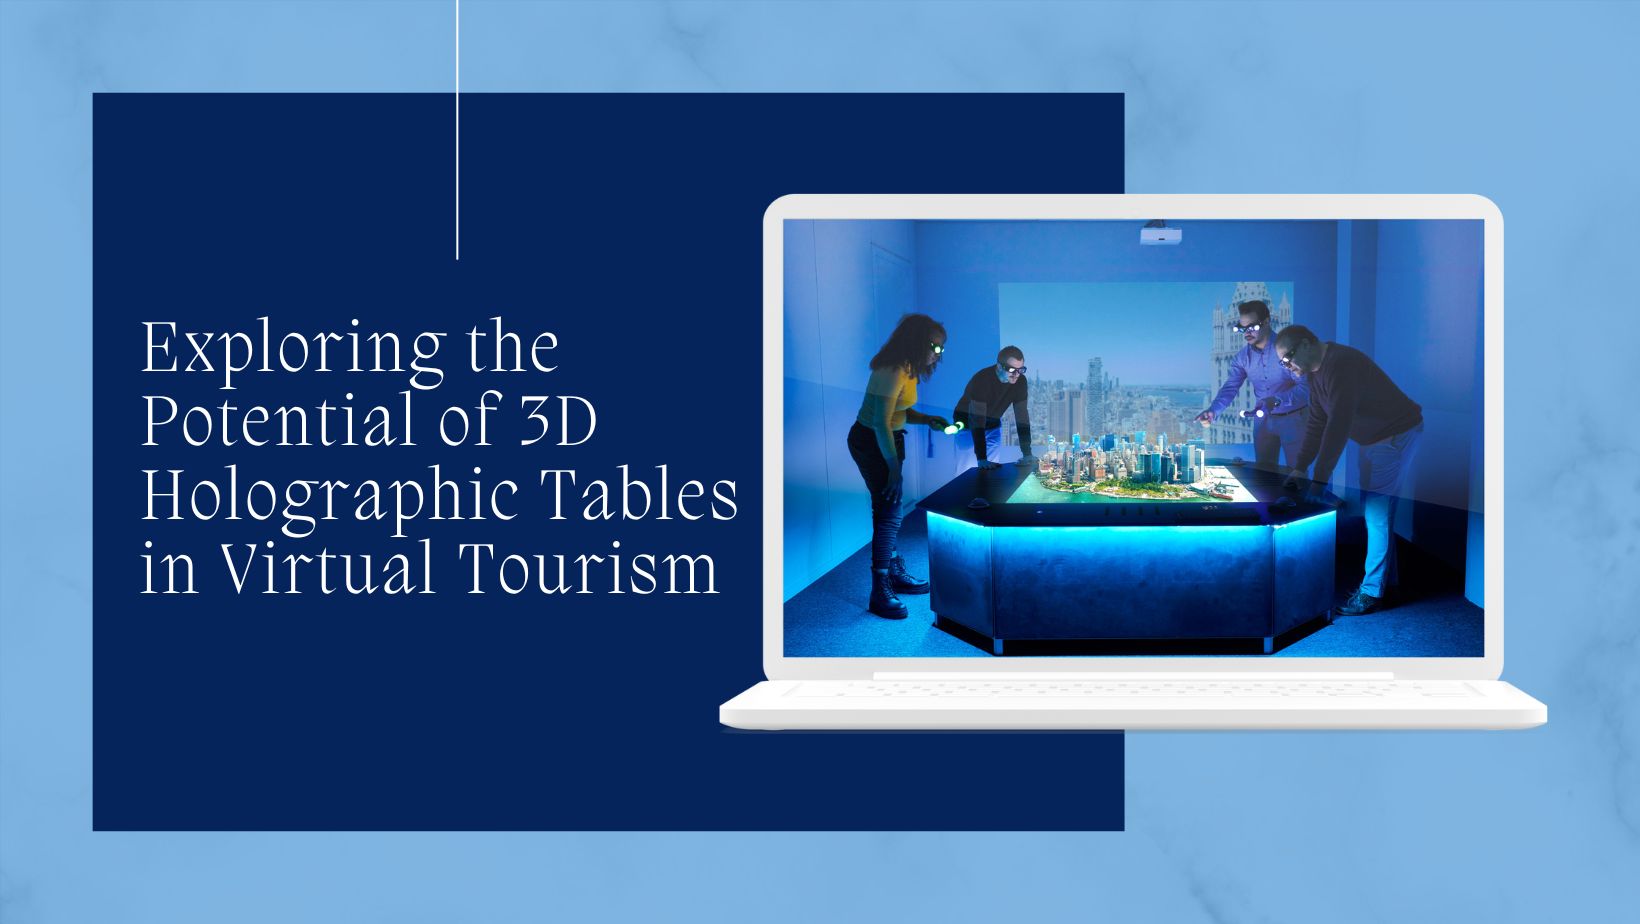 3D Holographic Tables in Virtual Tourism